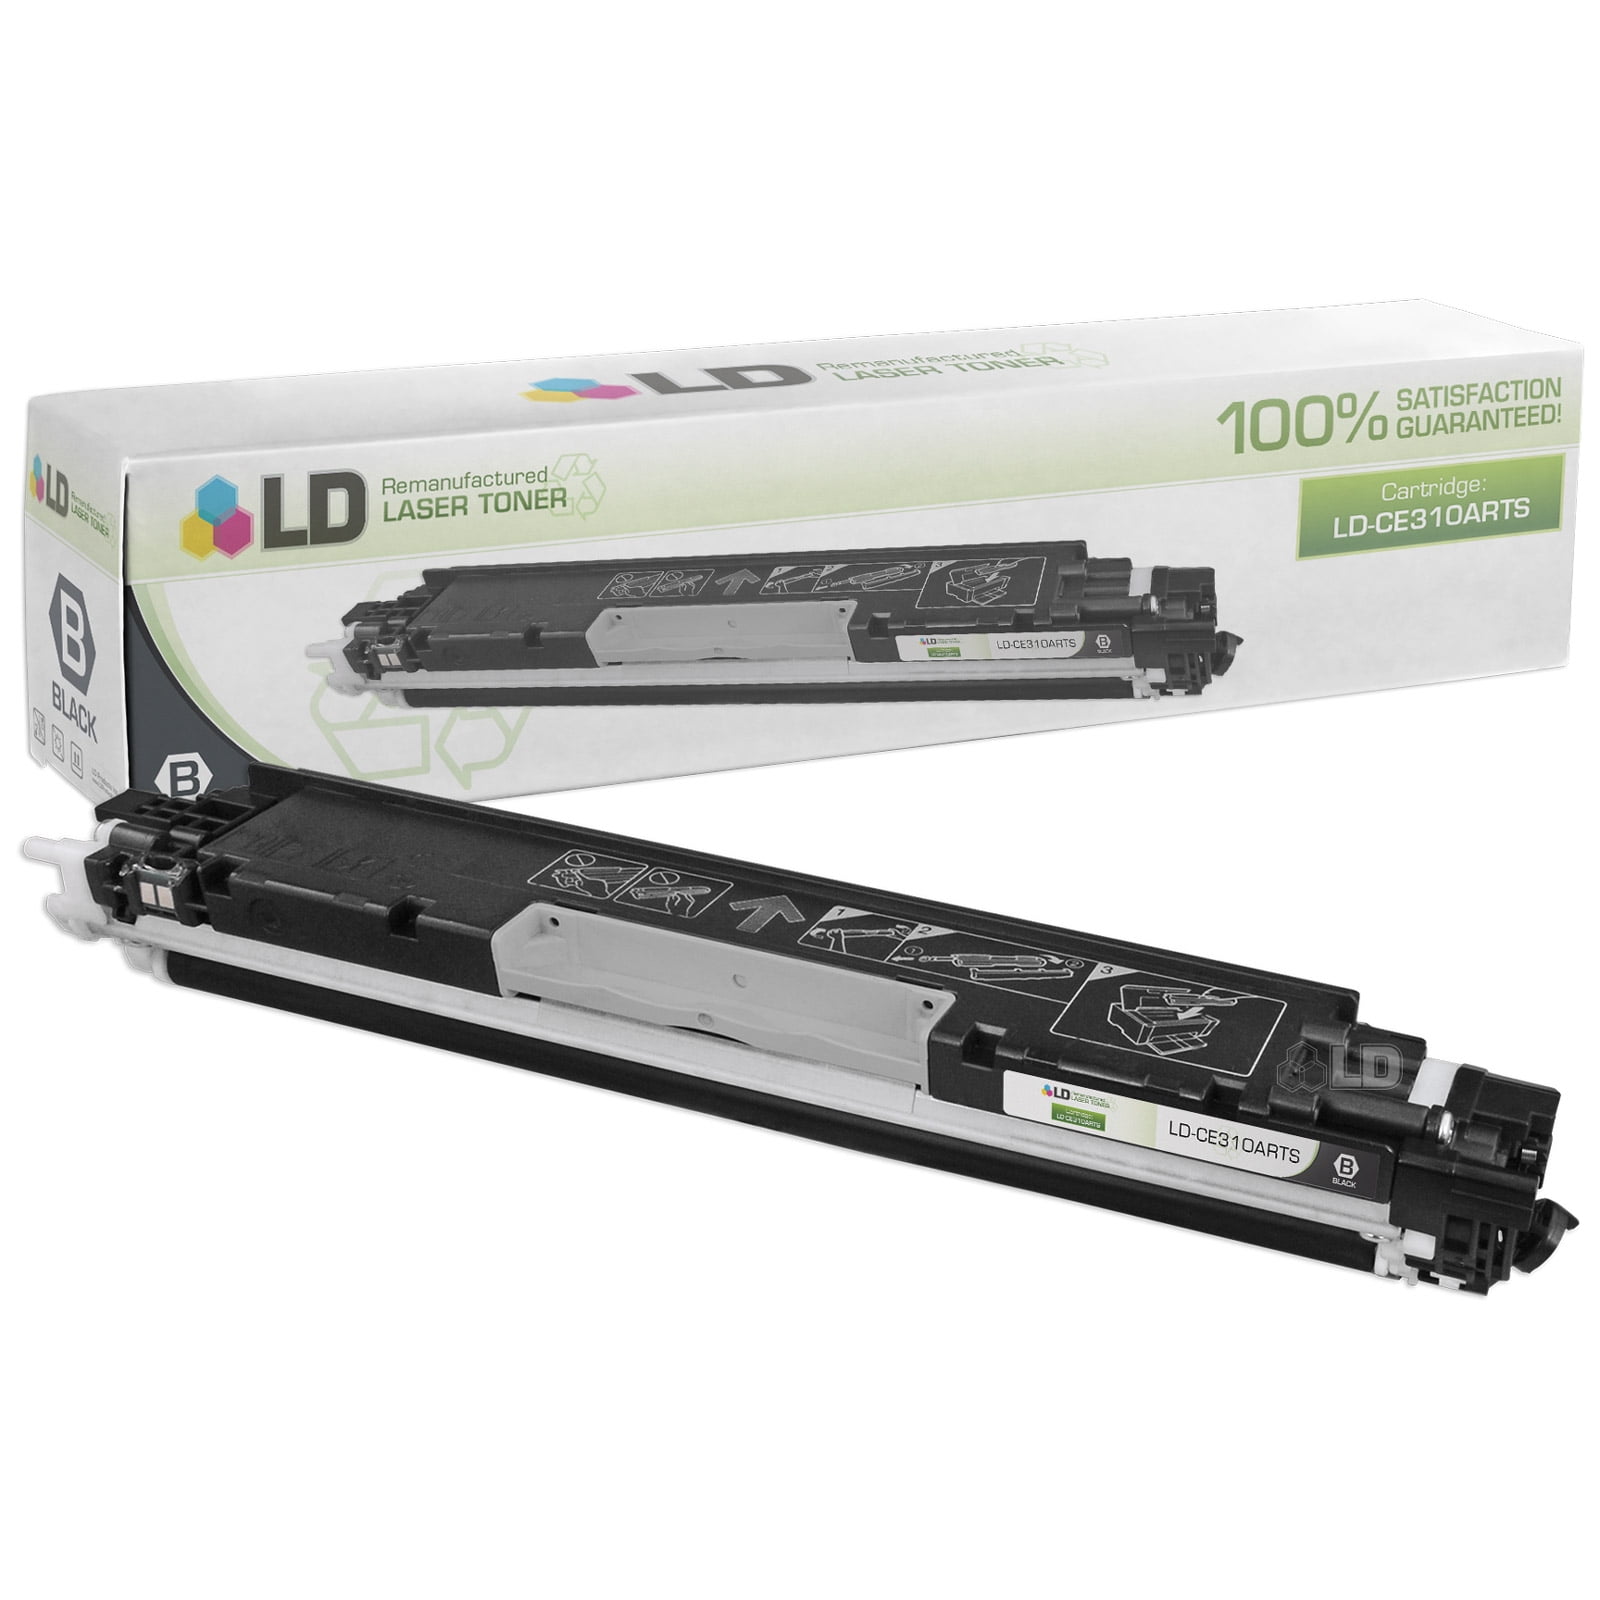 Plante træer låne Himlen LD Remanufactured Replacement for HP 126A CE310A Black Toner Cartridge for Color  LaserJet 100 MFP M175a, 100 MFP M175nw, CP1025nw, TopShot Pro M275, LaserJet  100 MFP M175a, 100 MFP M175nw, CP1025nw - Walmart.com